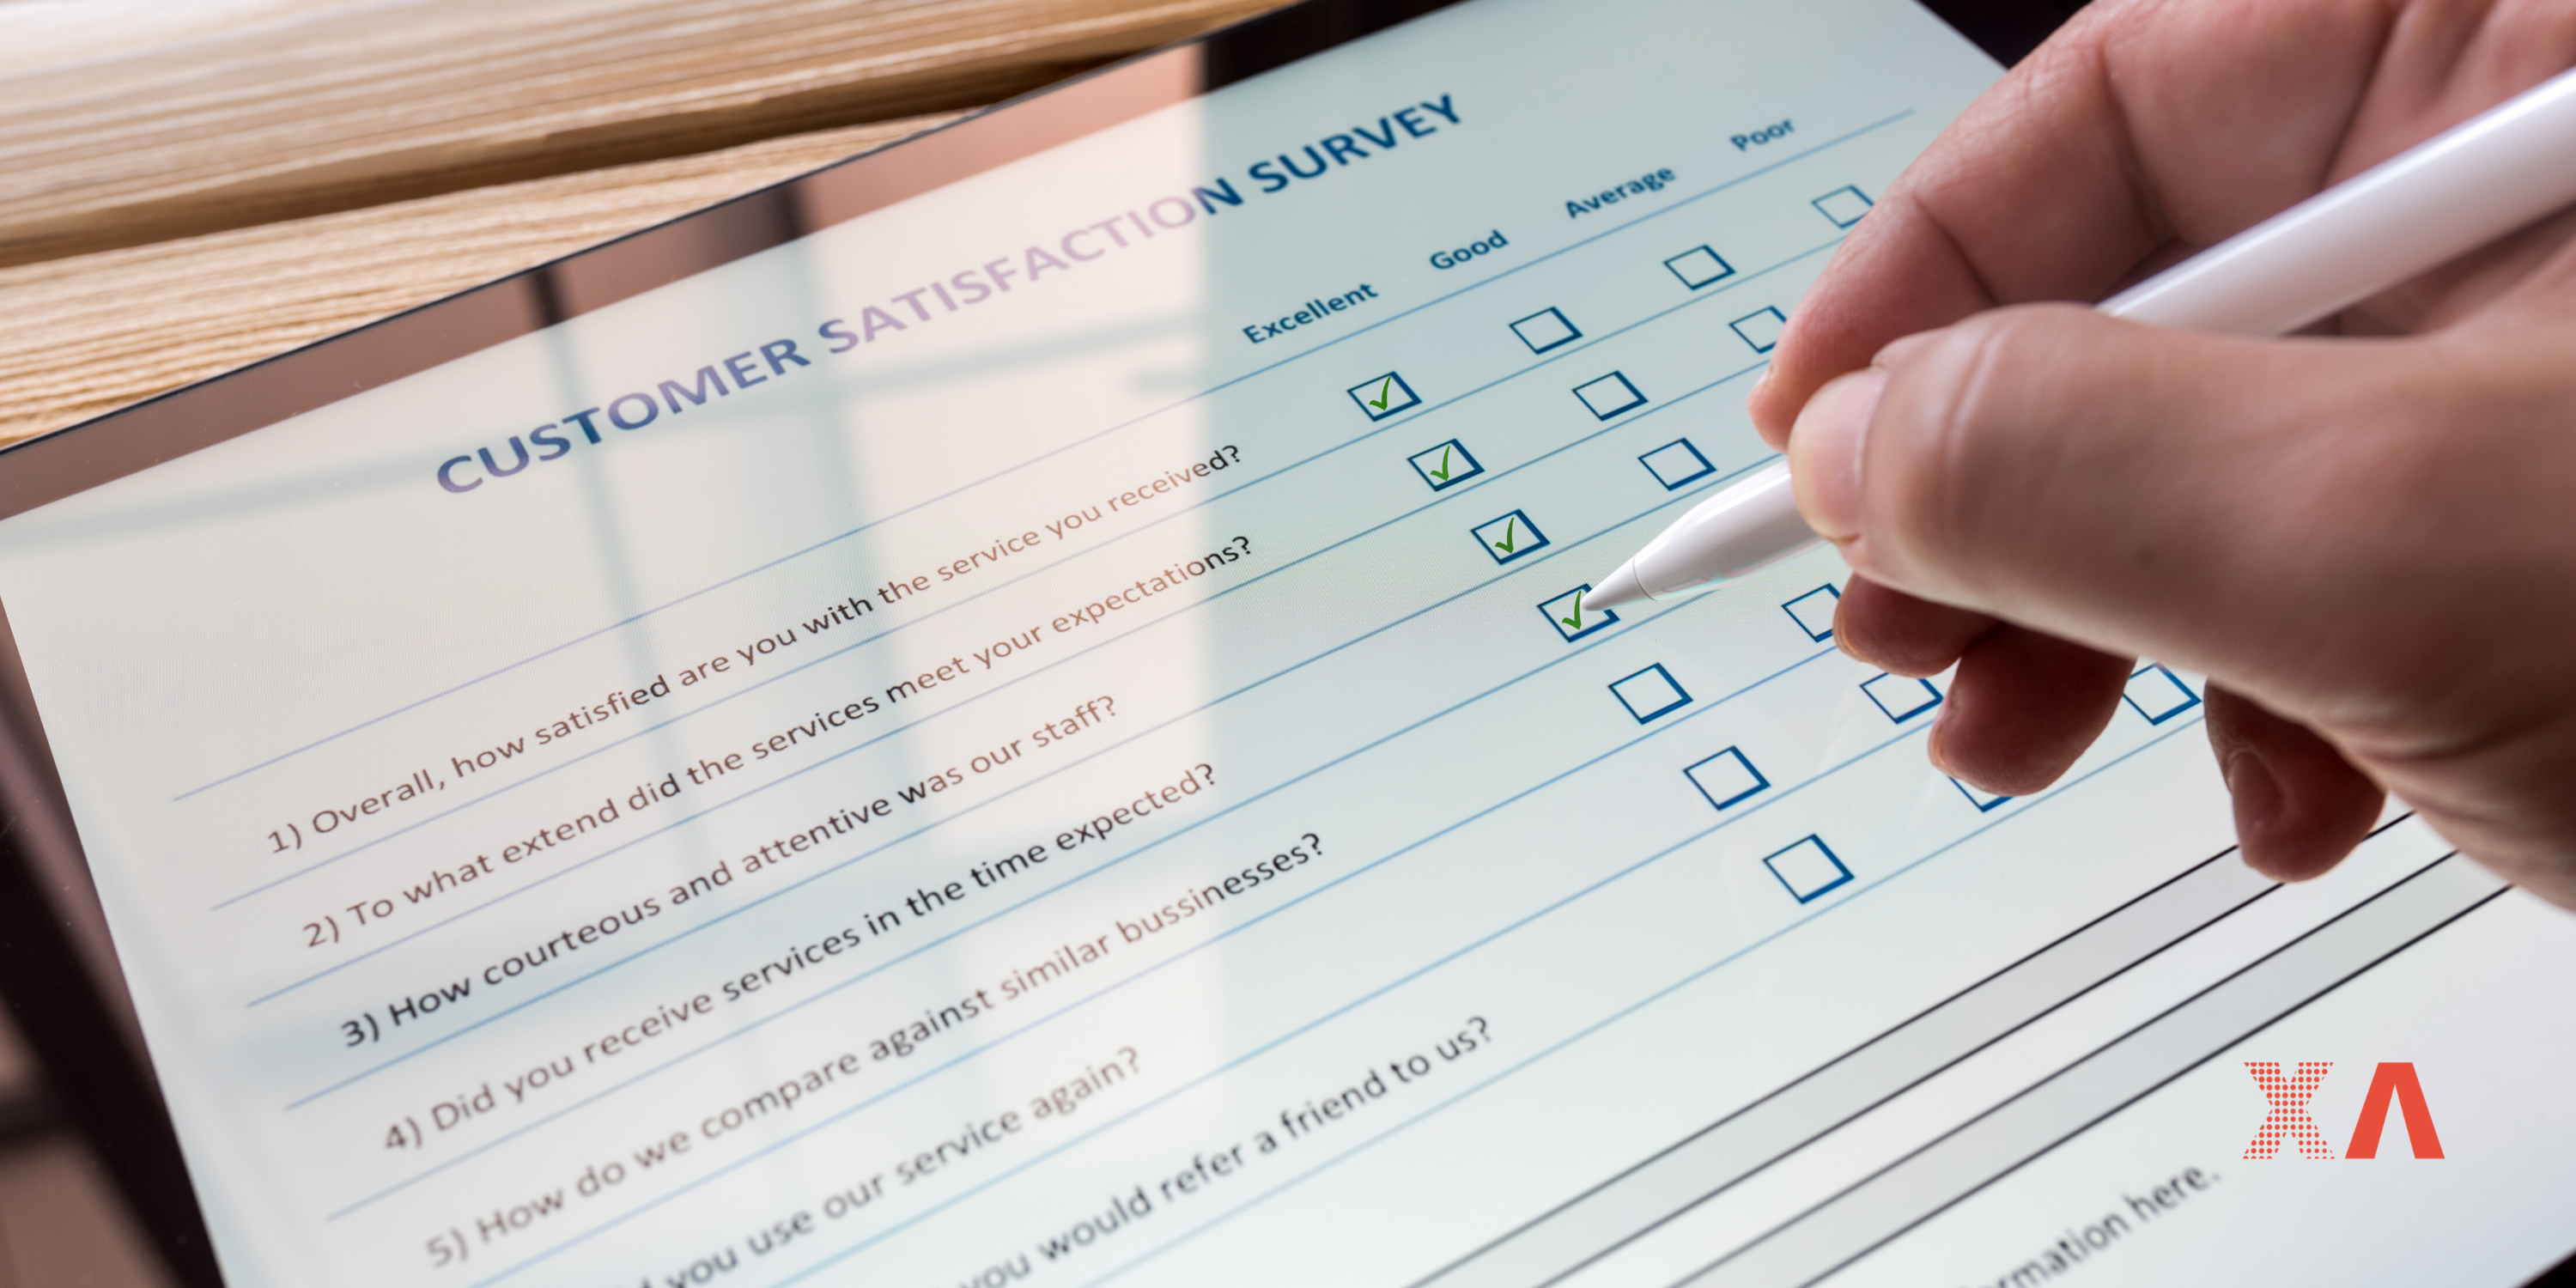 How to Increase Customer Survey Response Rates